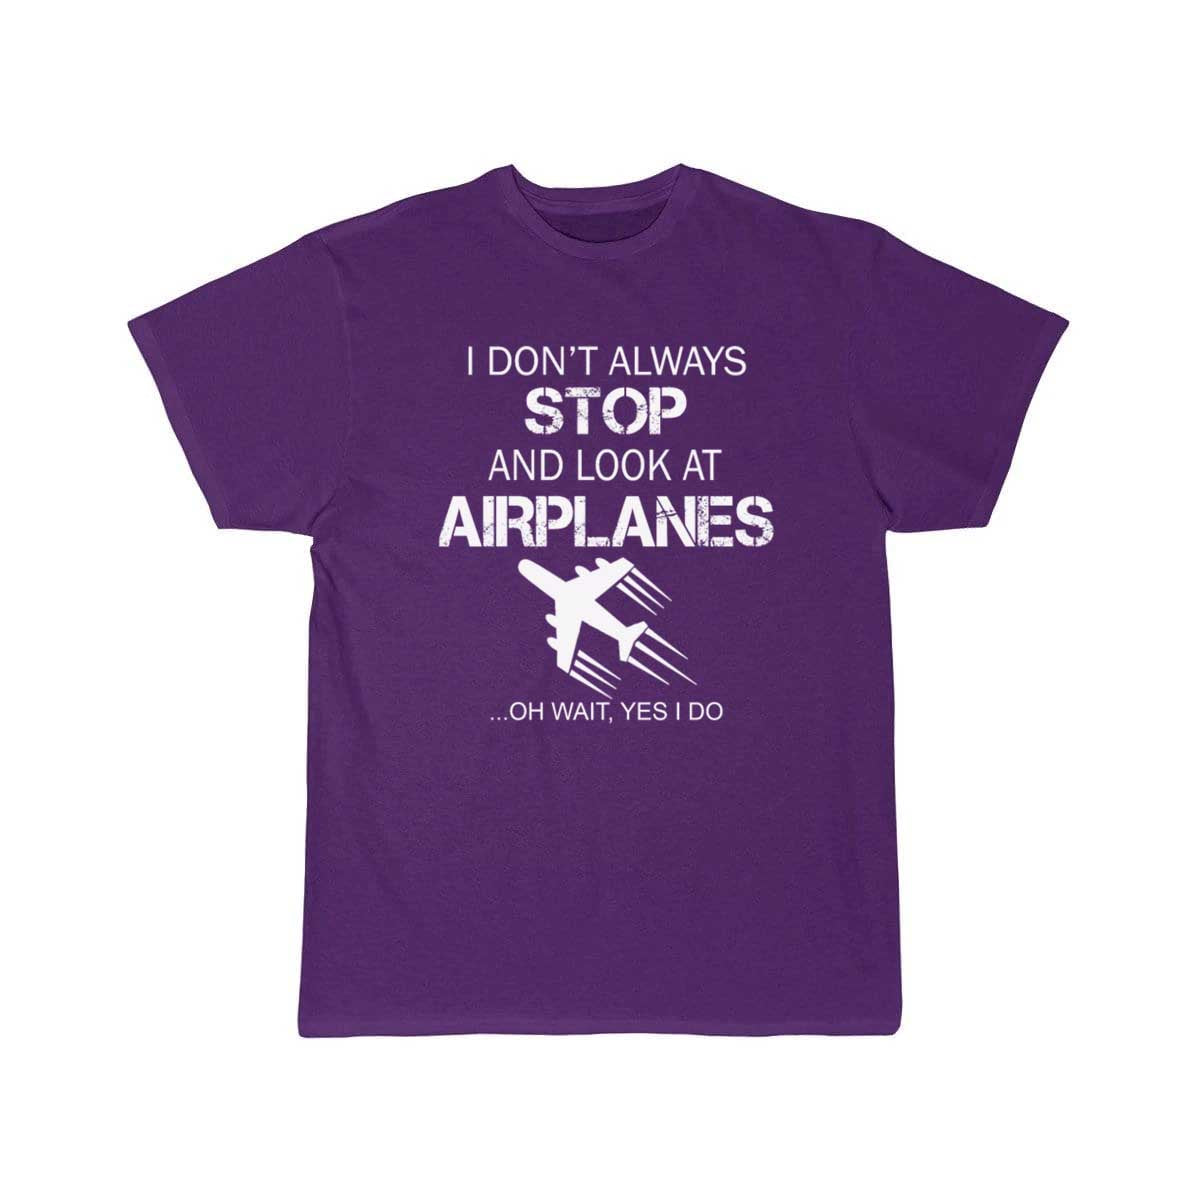 I DON'T ALWAYS STOP AND LOOK AT AIRPLANE T-SHIRT THE AV8R